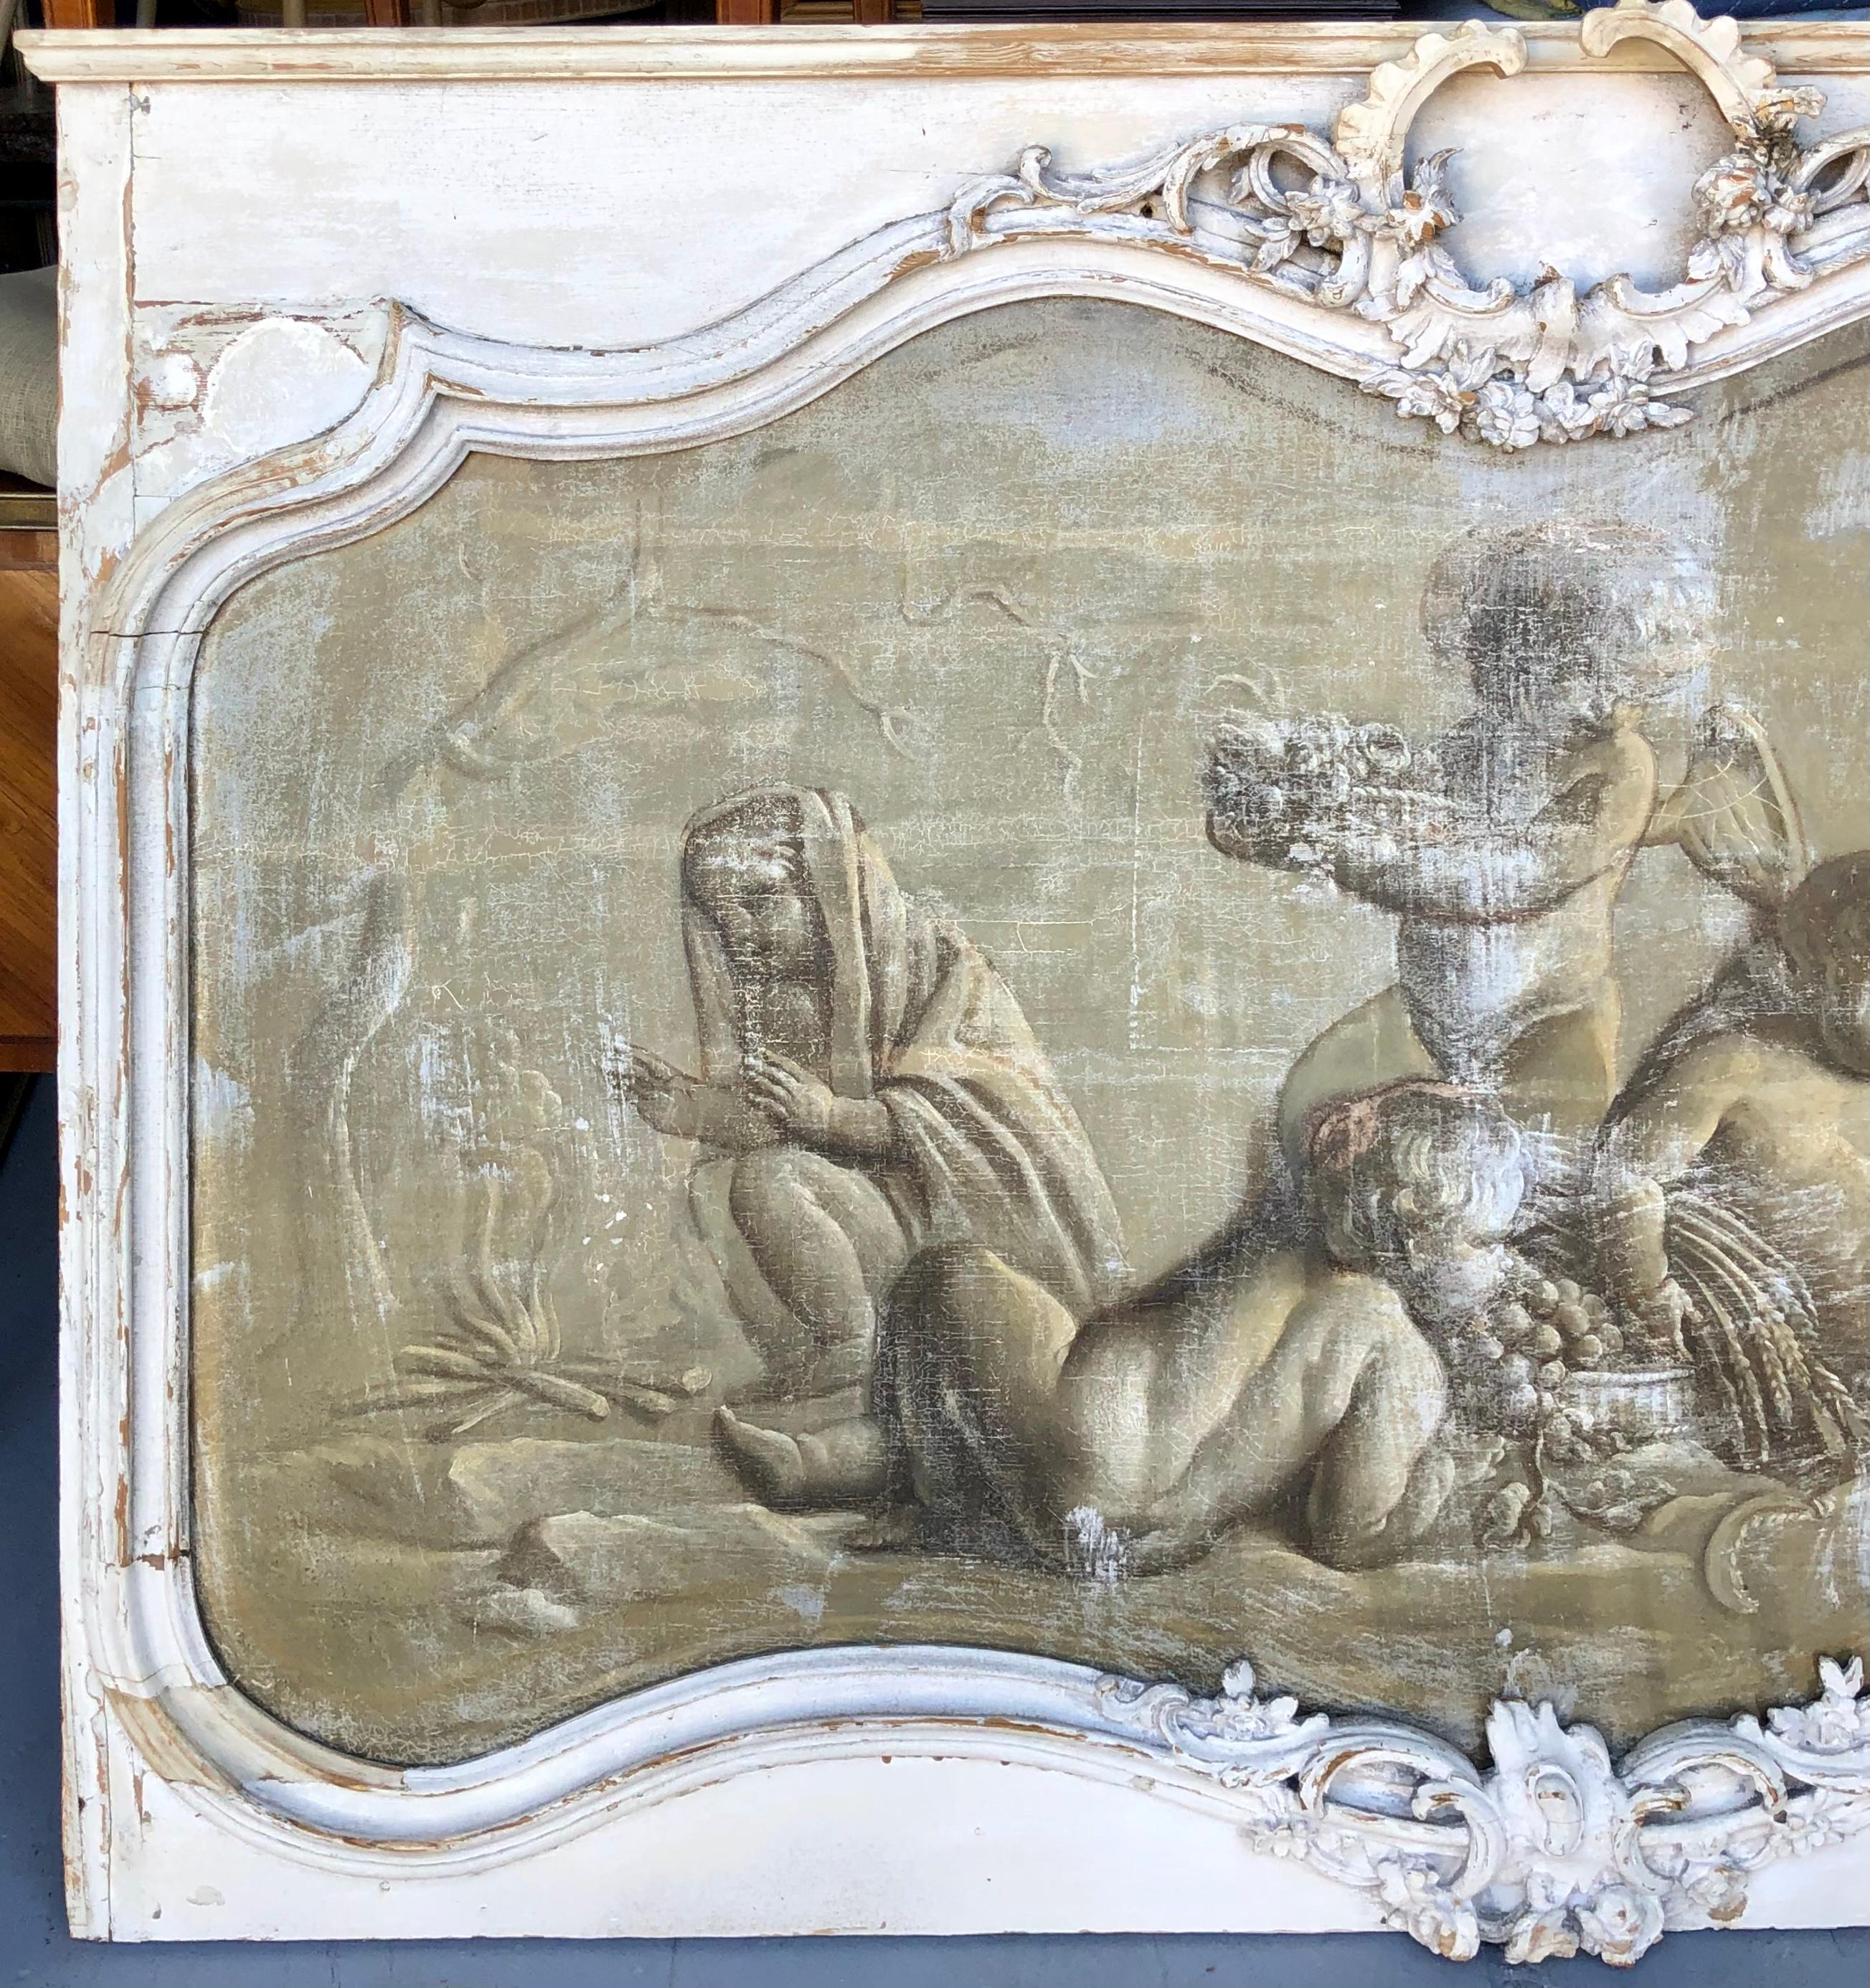 Hand-painted in France, this handsome grisaille overdoor painting is from the 18th Century. Grisaille is a monochromatic painting method that relies on using gray or other neutral colors to invoke qualities of a sculpture or drawing.
This painting